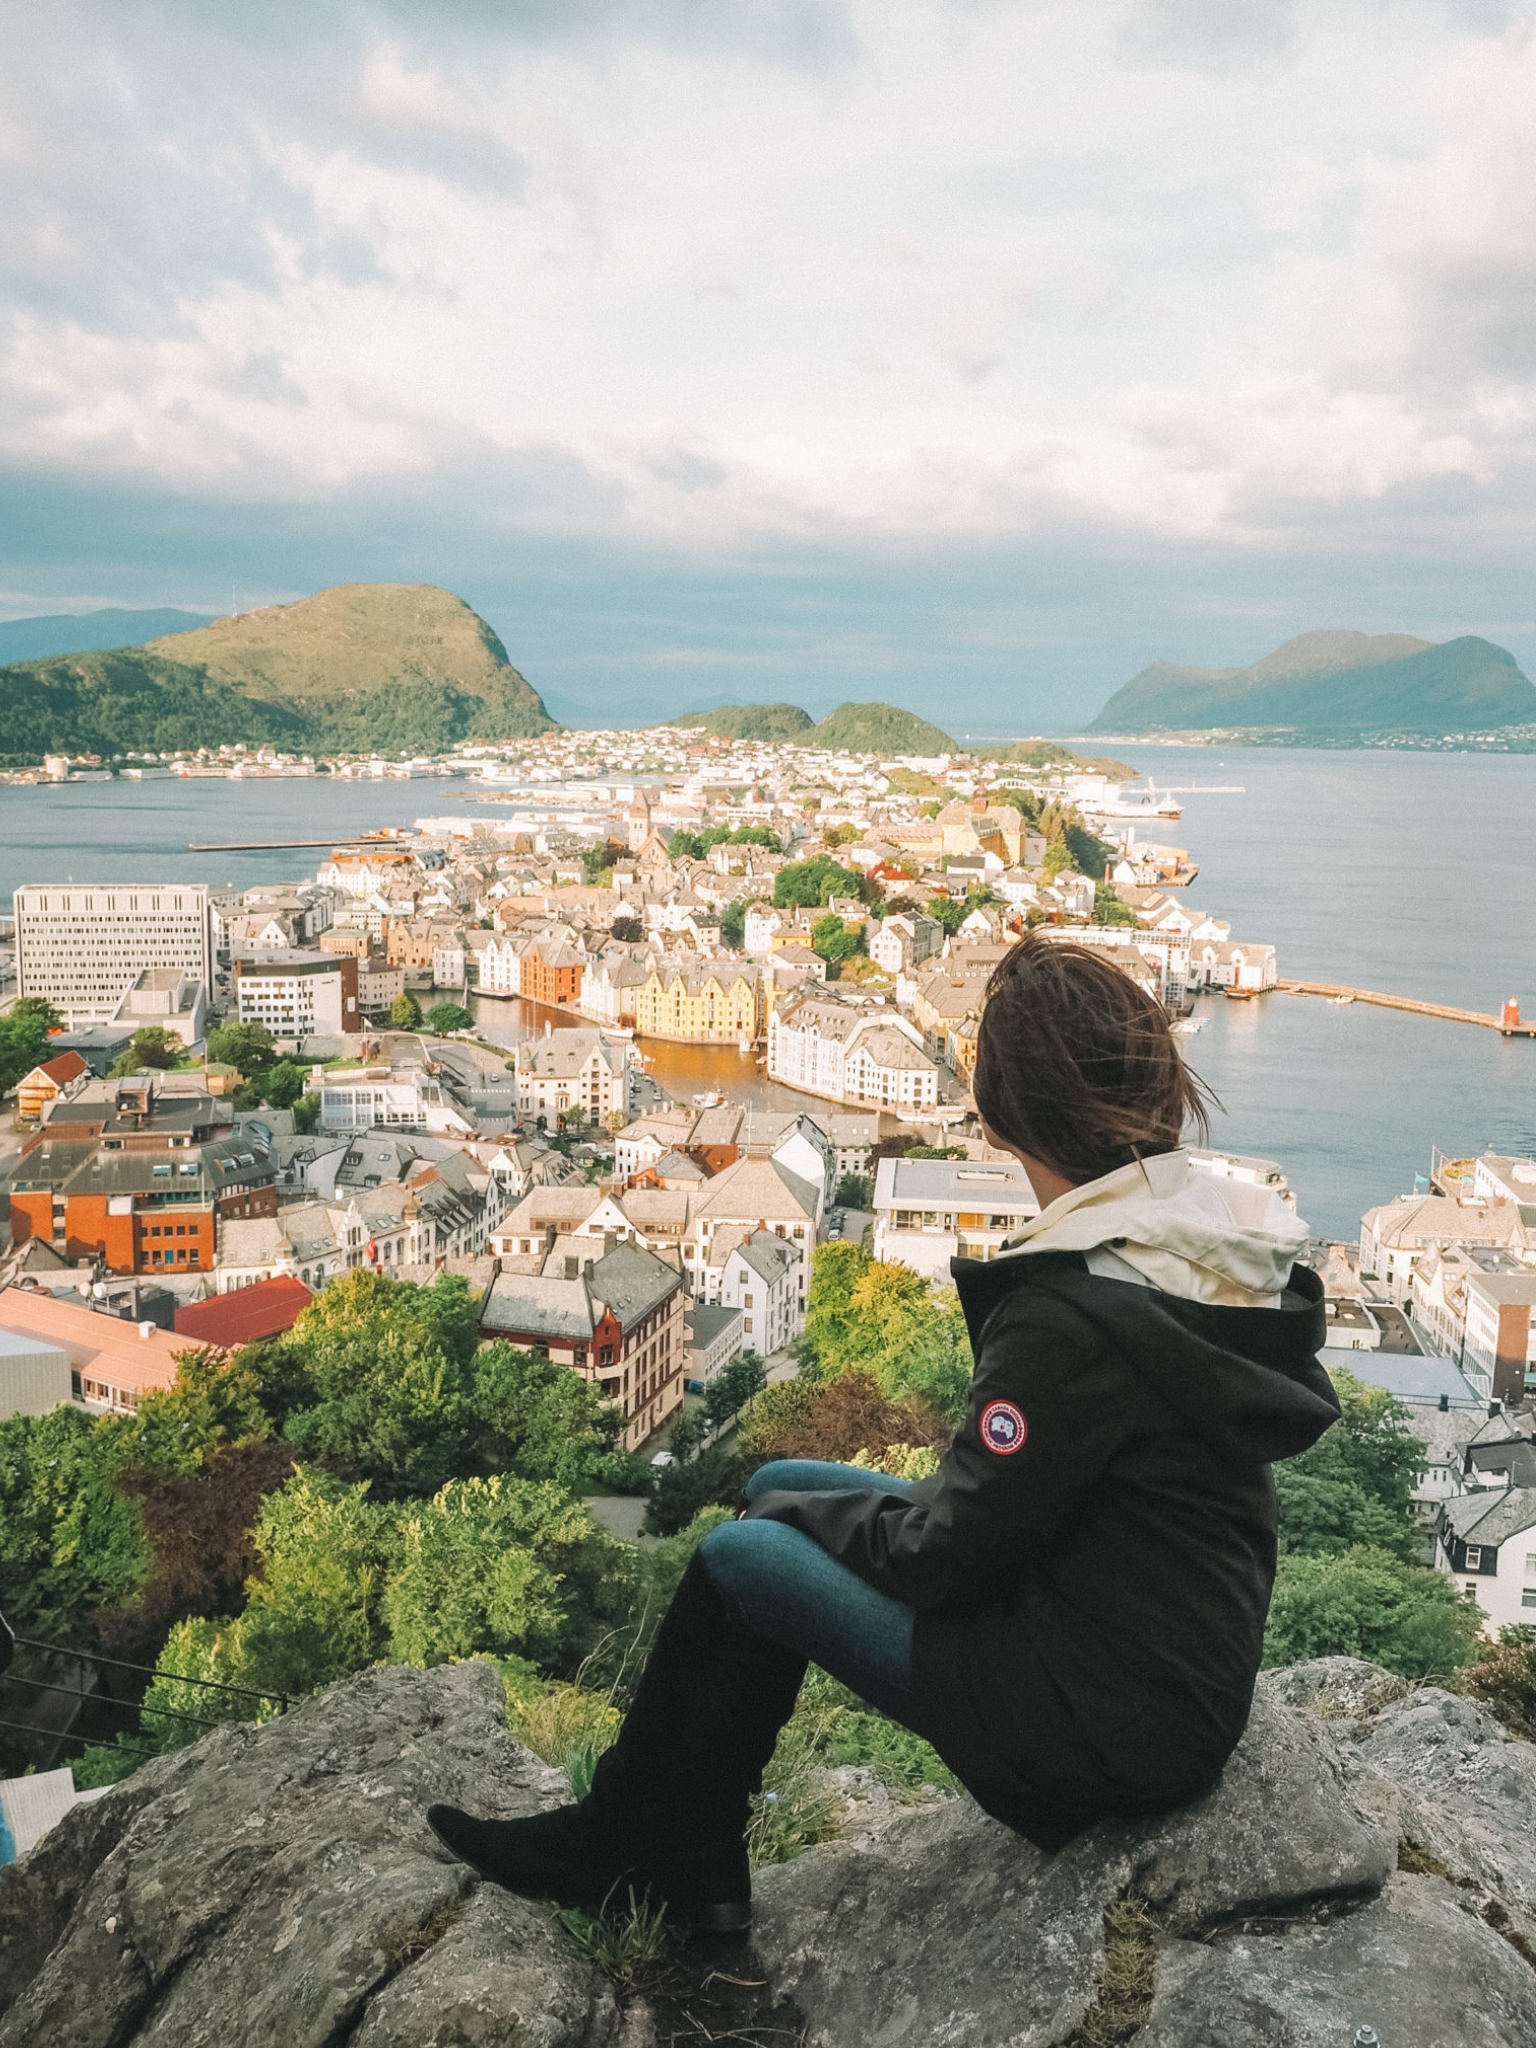 The 26 Safest Cities for Female Solo Travelers